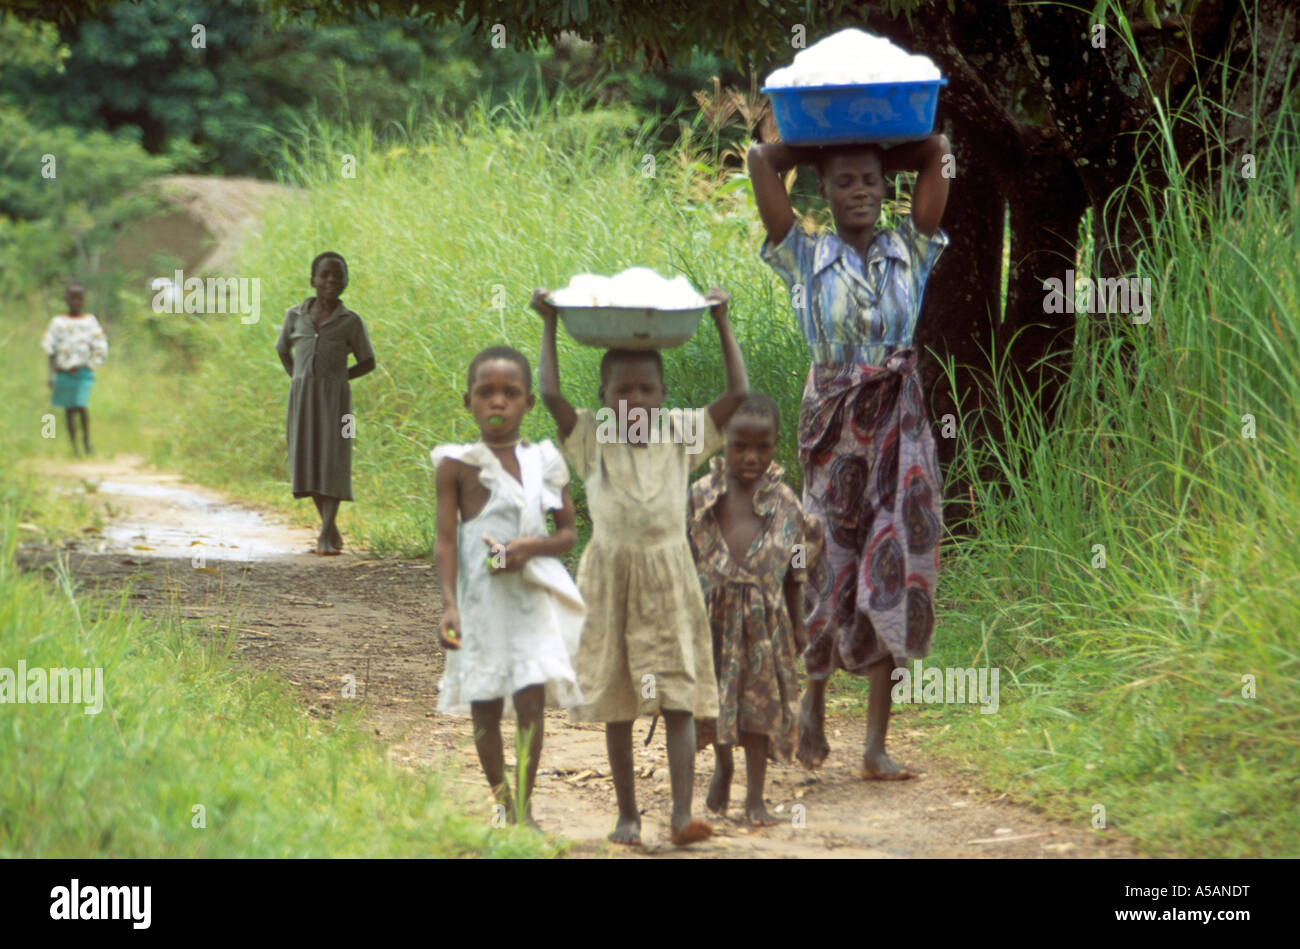 Mother and children carrying buckets on head, Malawi, Africa Stock Photo